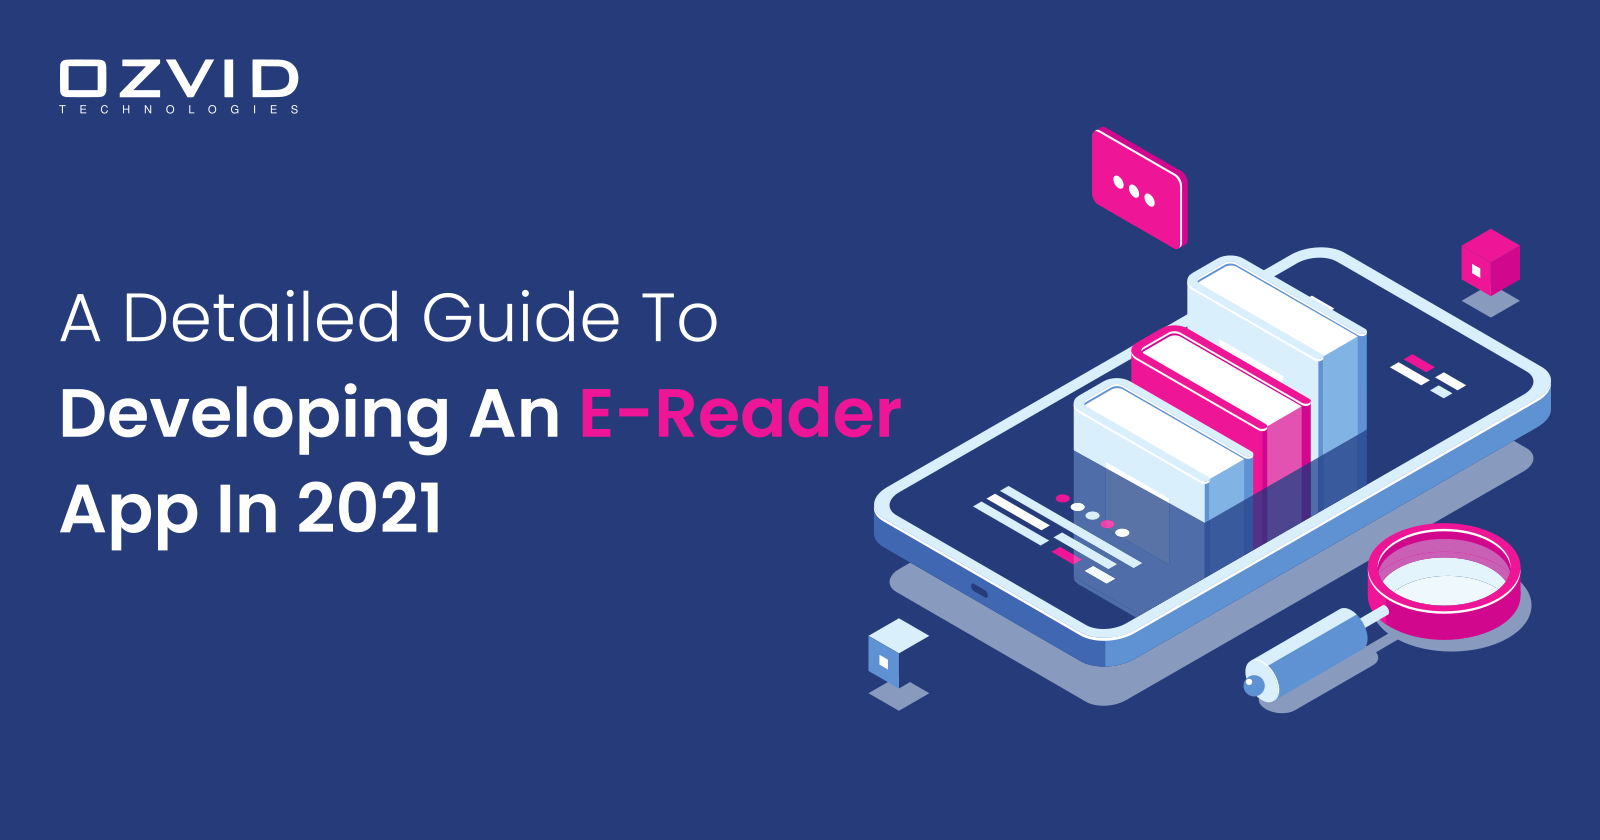 A Detailed Guide To Developing An e-Reader App In 2021